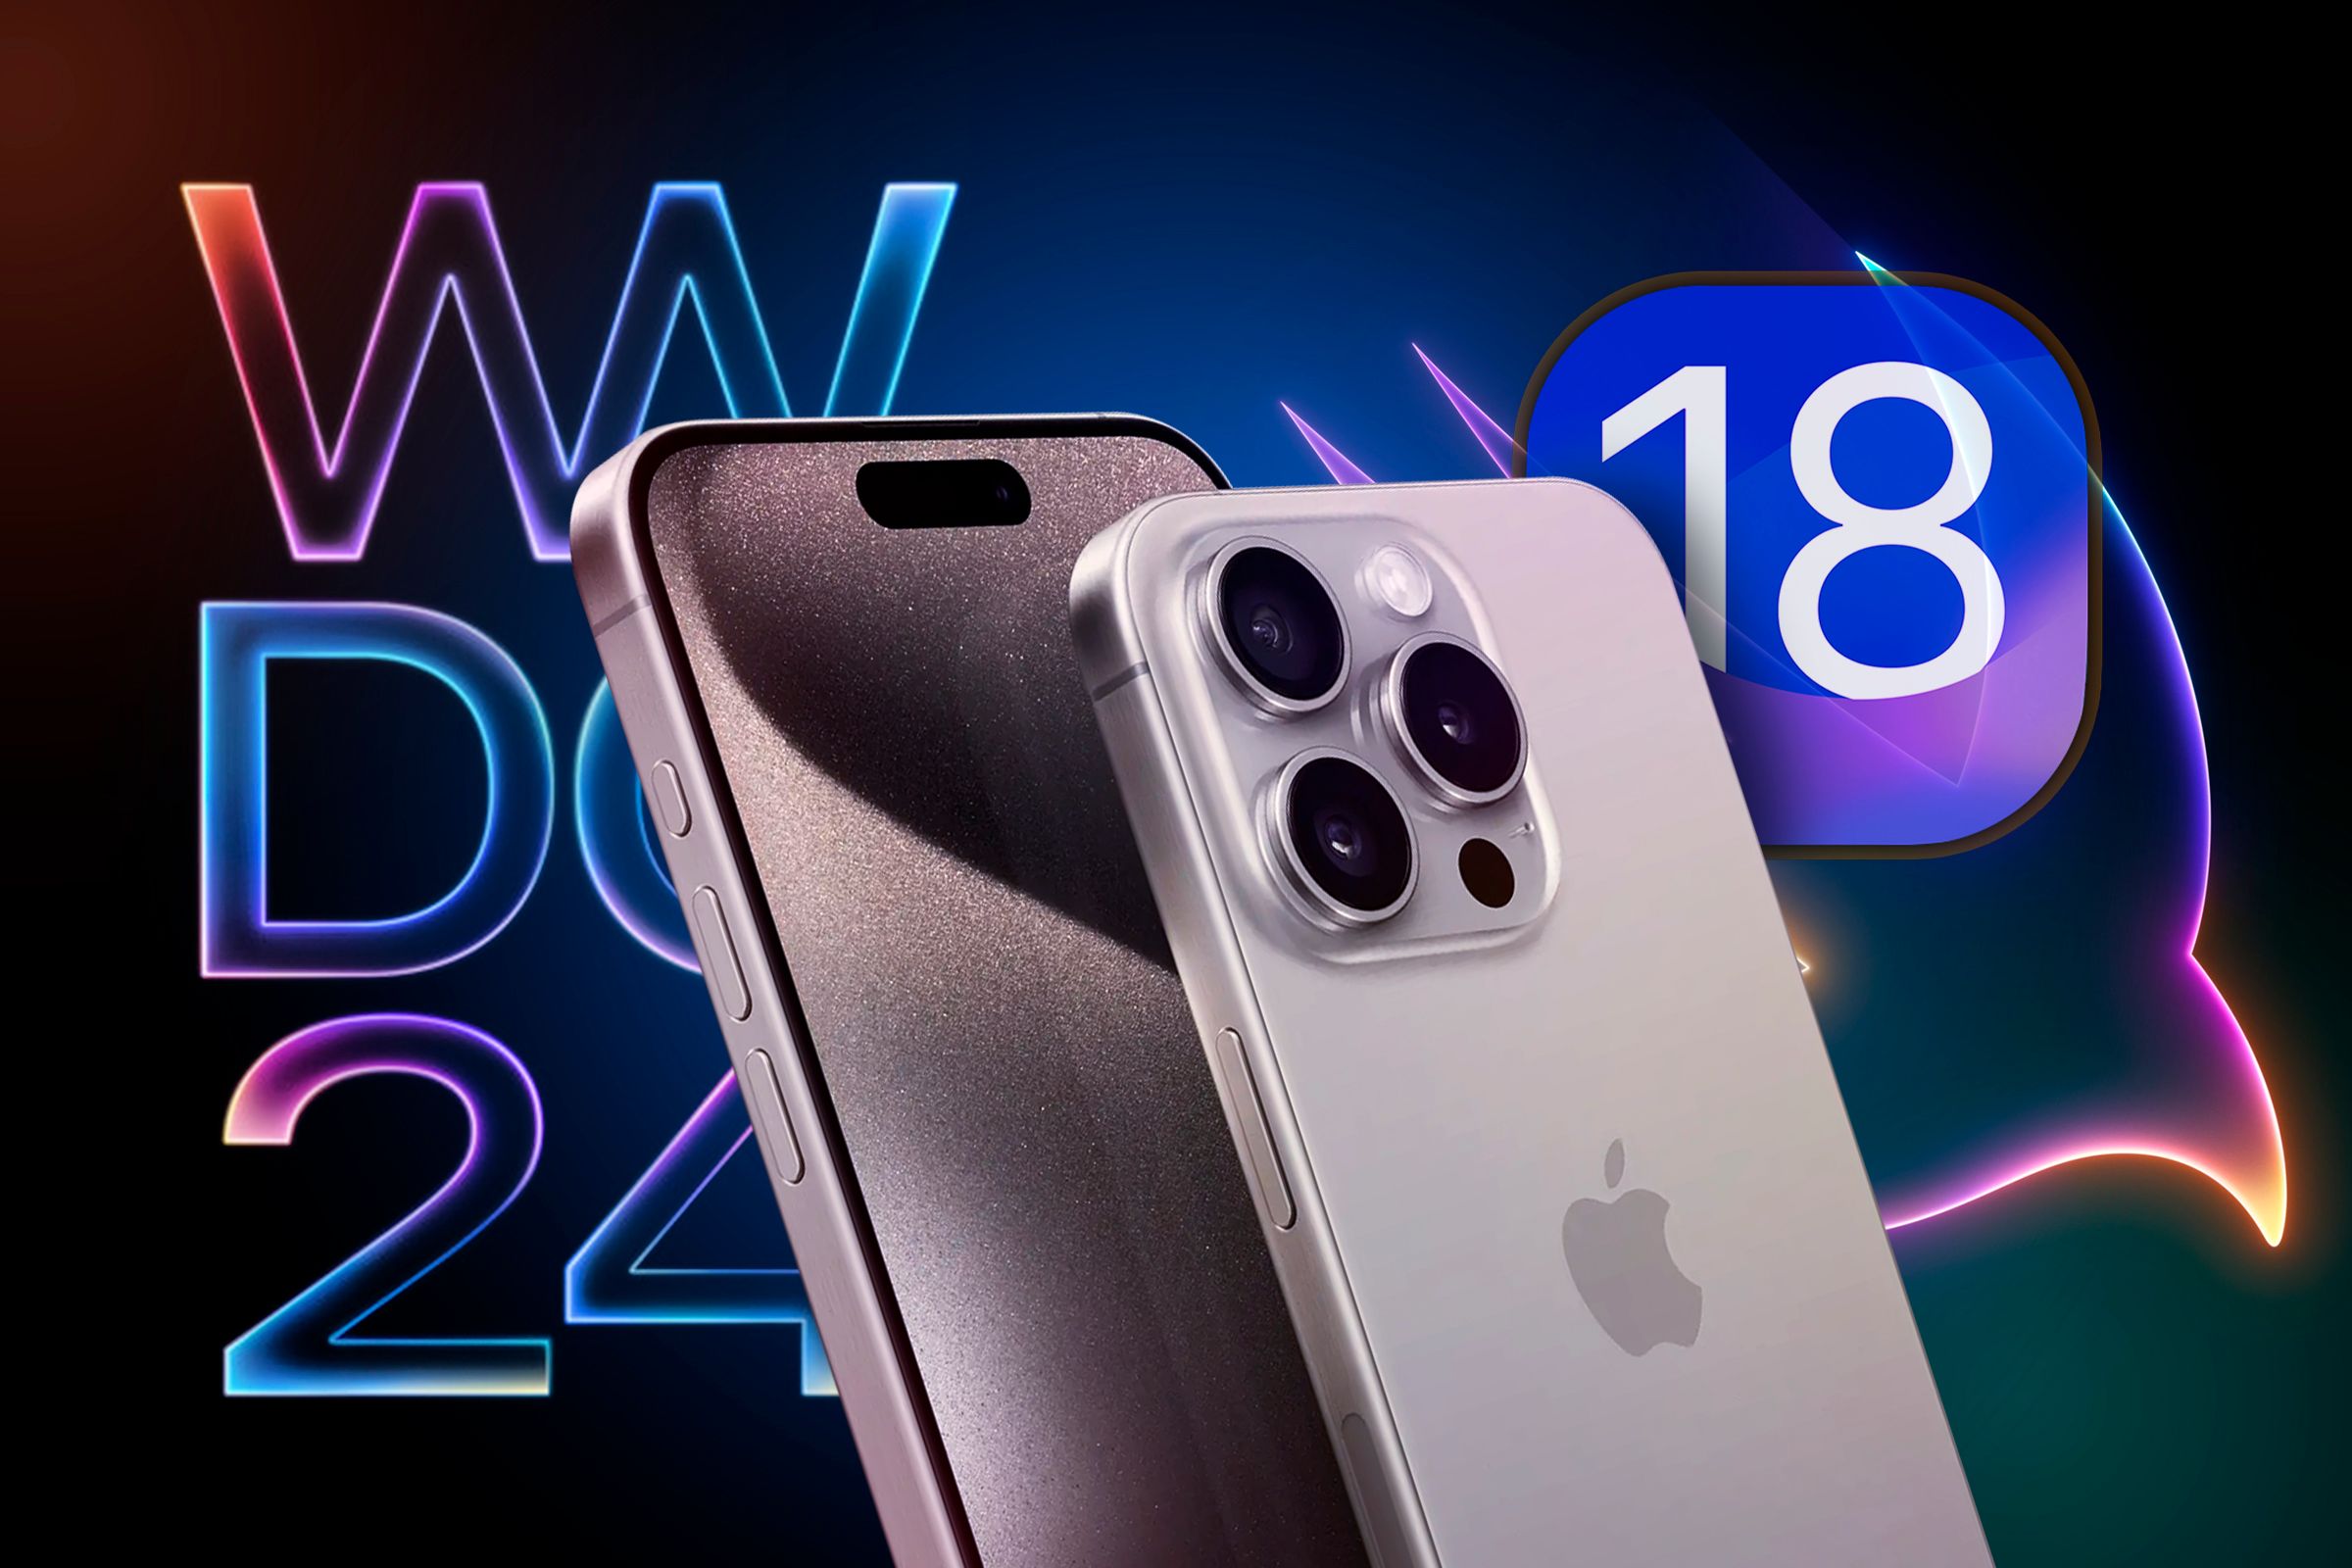 An Iphone with the WWDC 24 logo in the background and an IOS 18 icon.